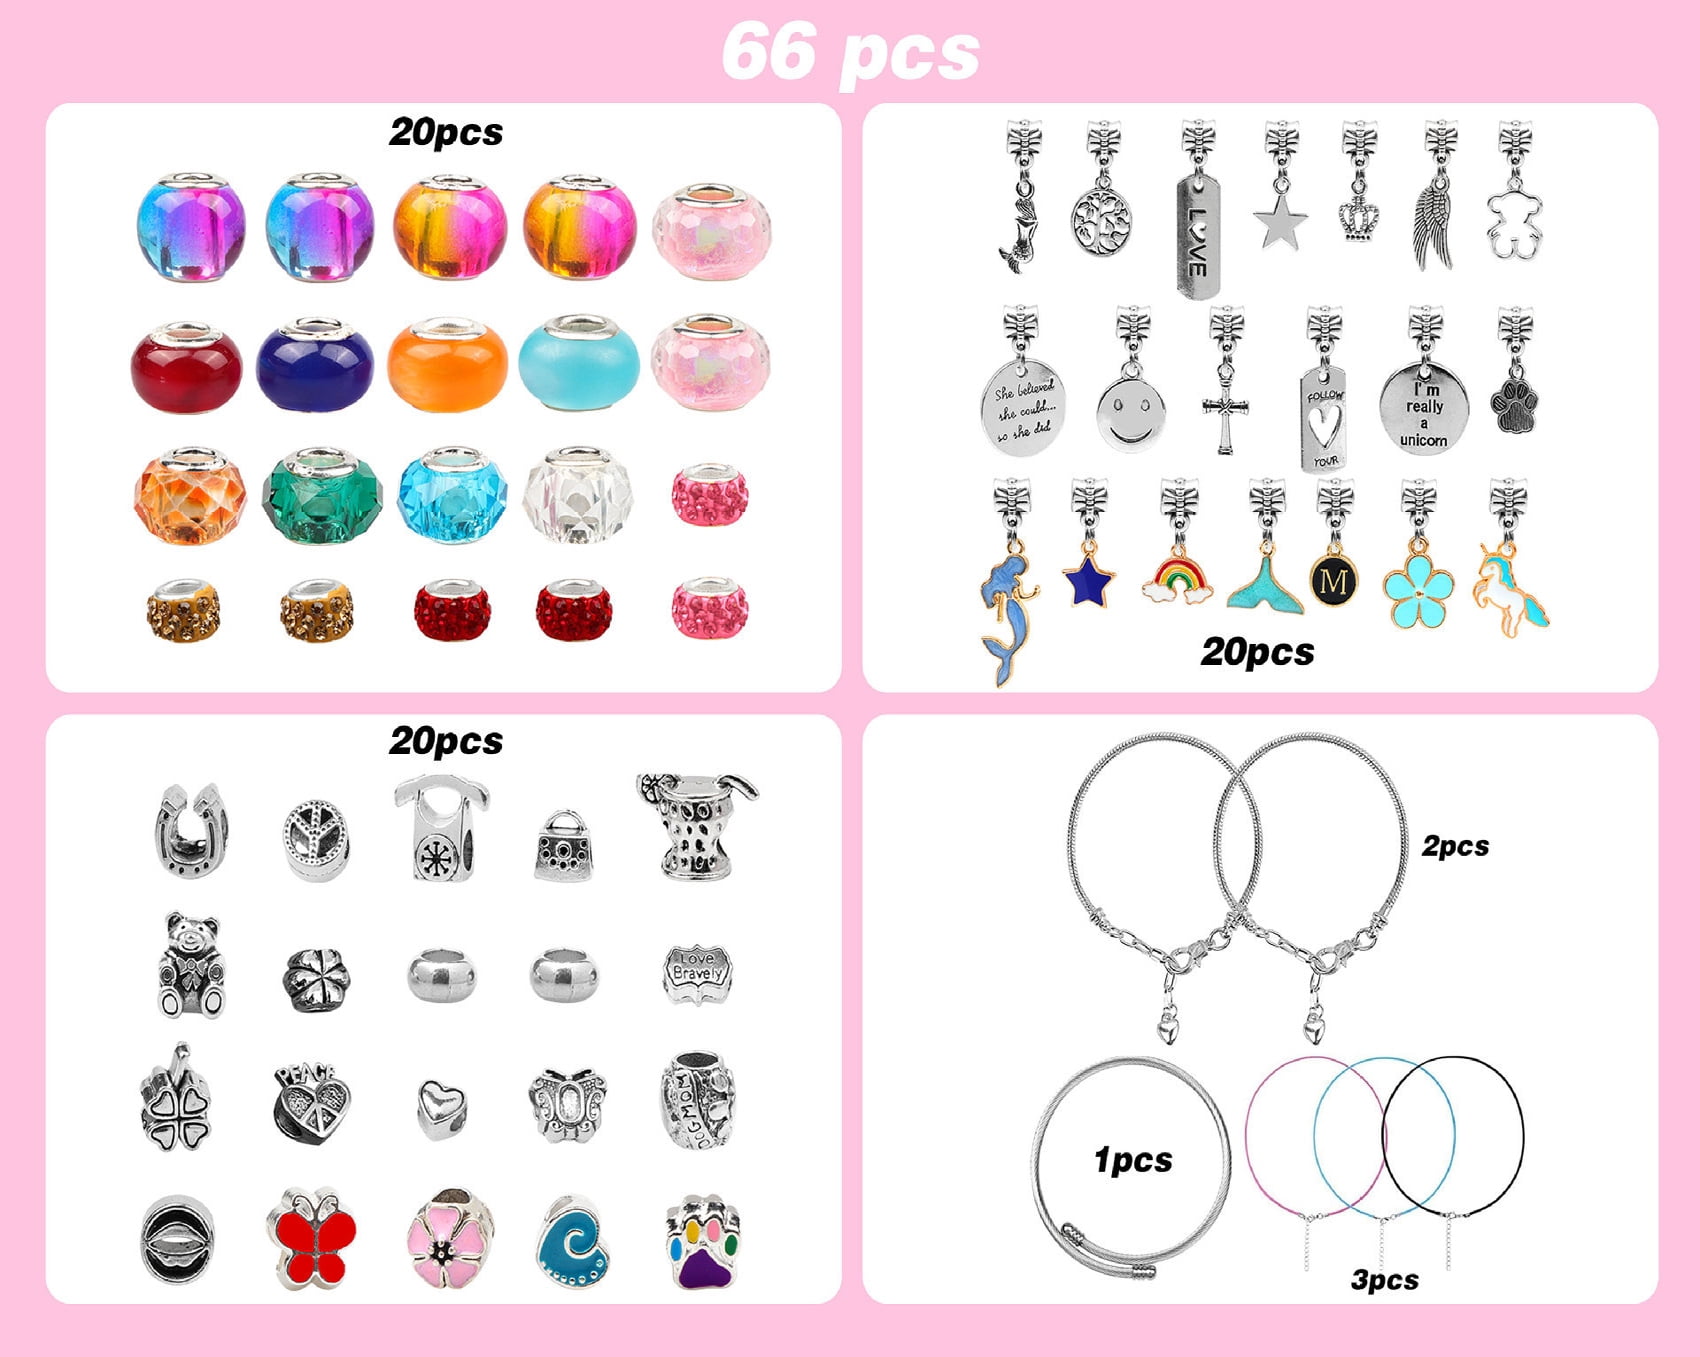 129PCS Charm Bracelet Making Kit Jewelry Making Unicorn Gifts for Teens  Girls Crafts 8-12 Years - Christmas Gift Idea for Teen Girls 